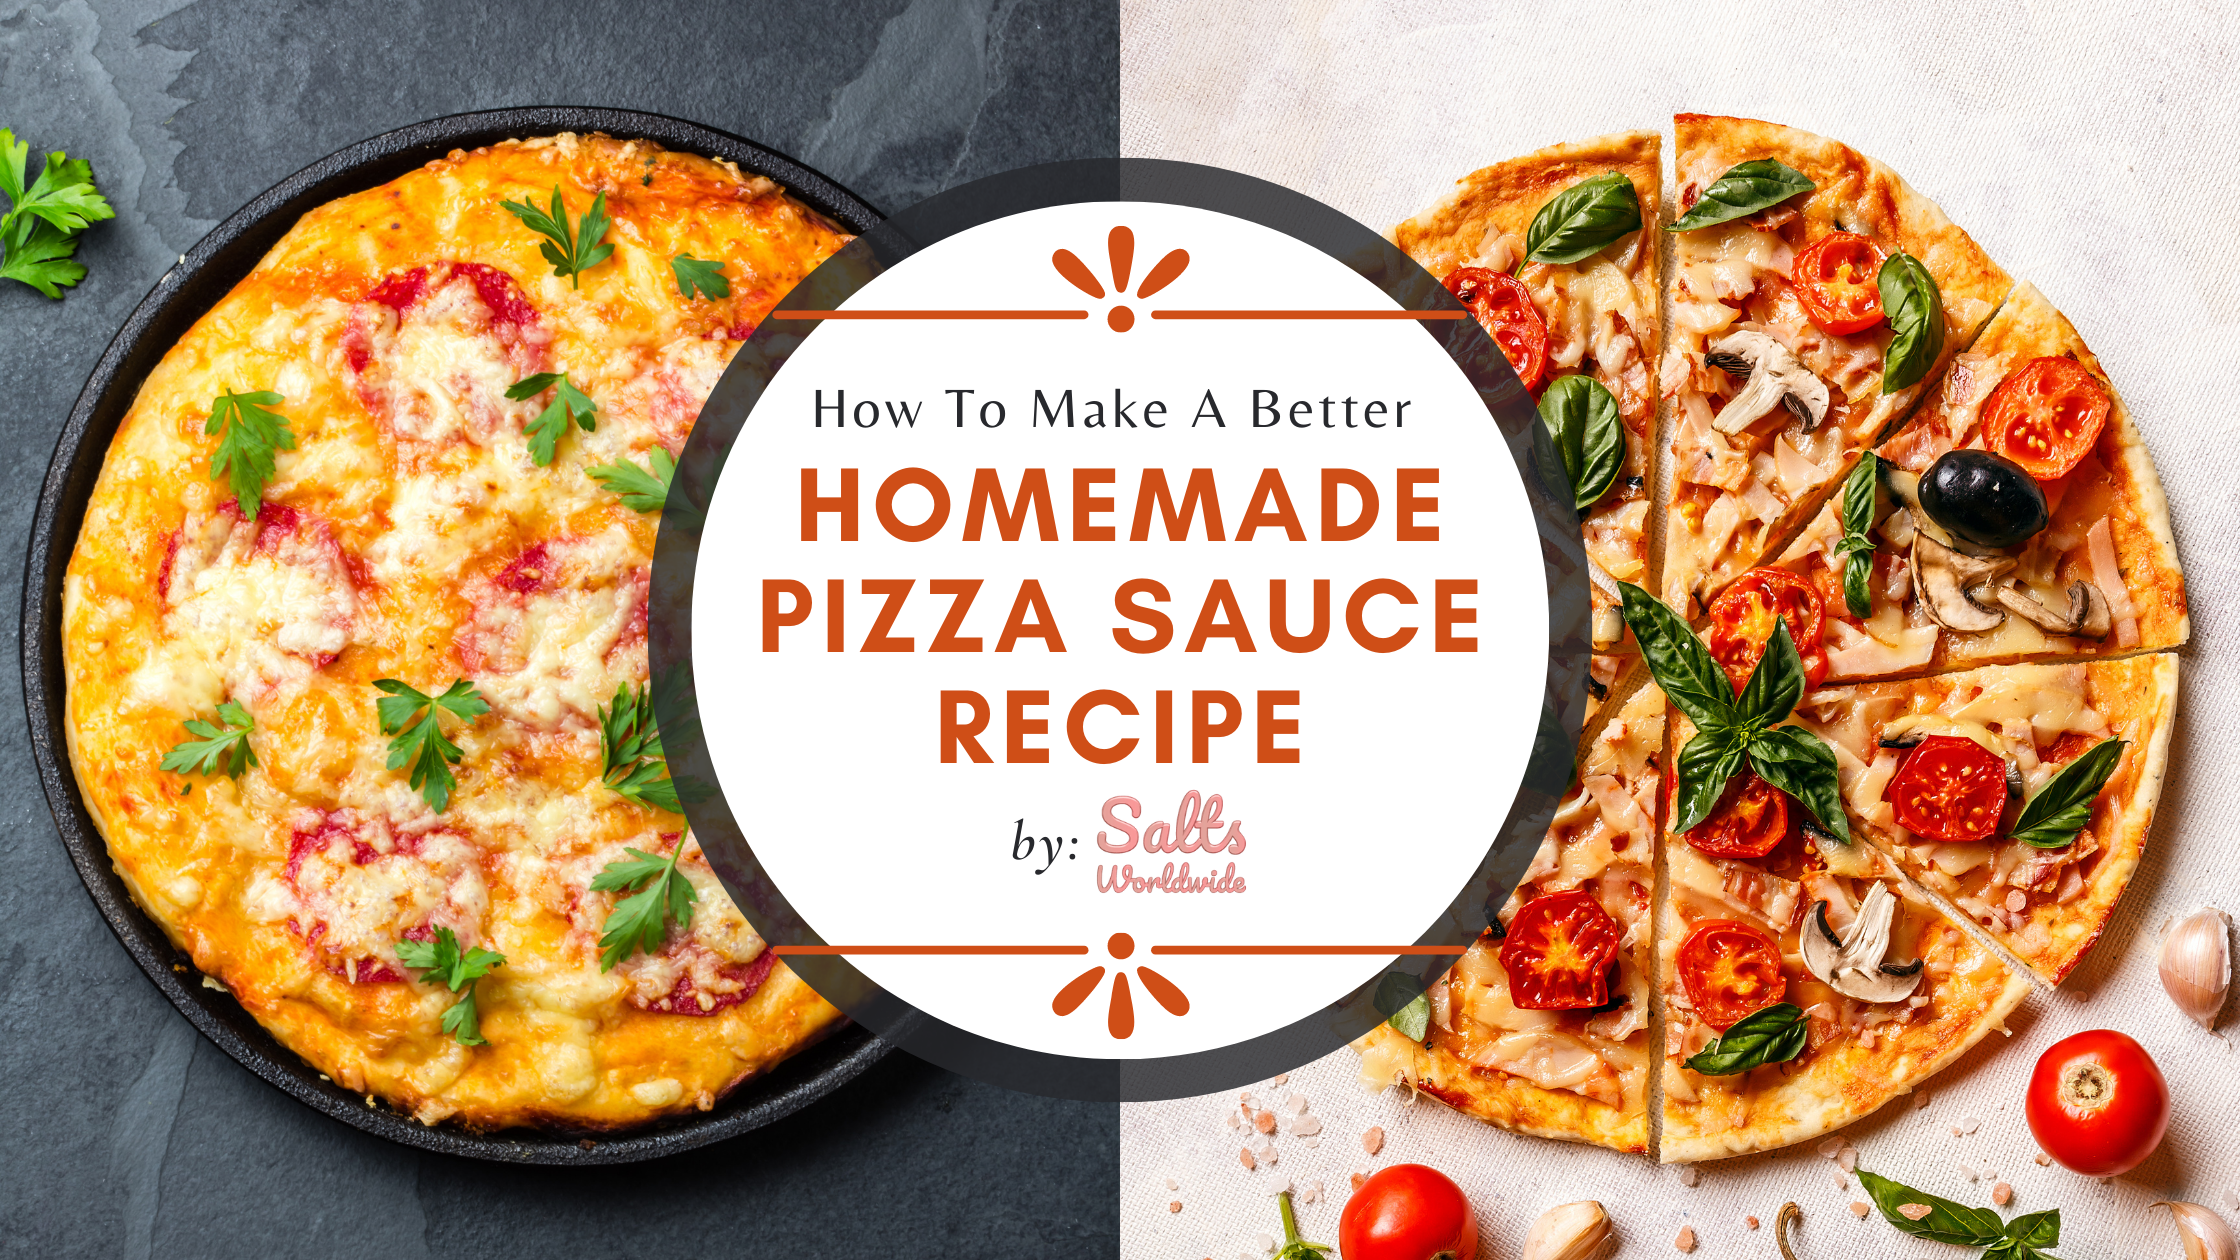 How To Make A Better Homemade Pizza Sauce Recipe